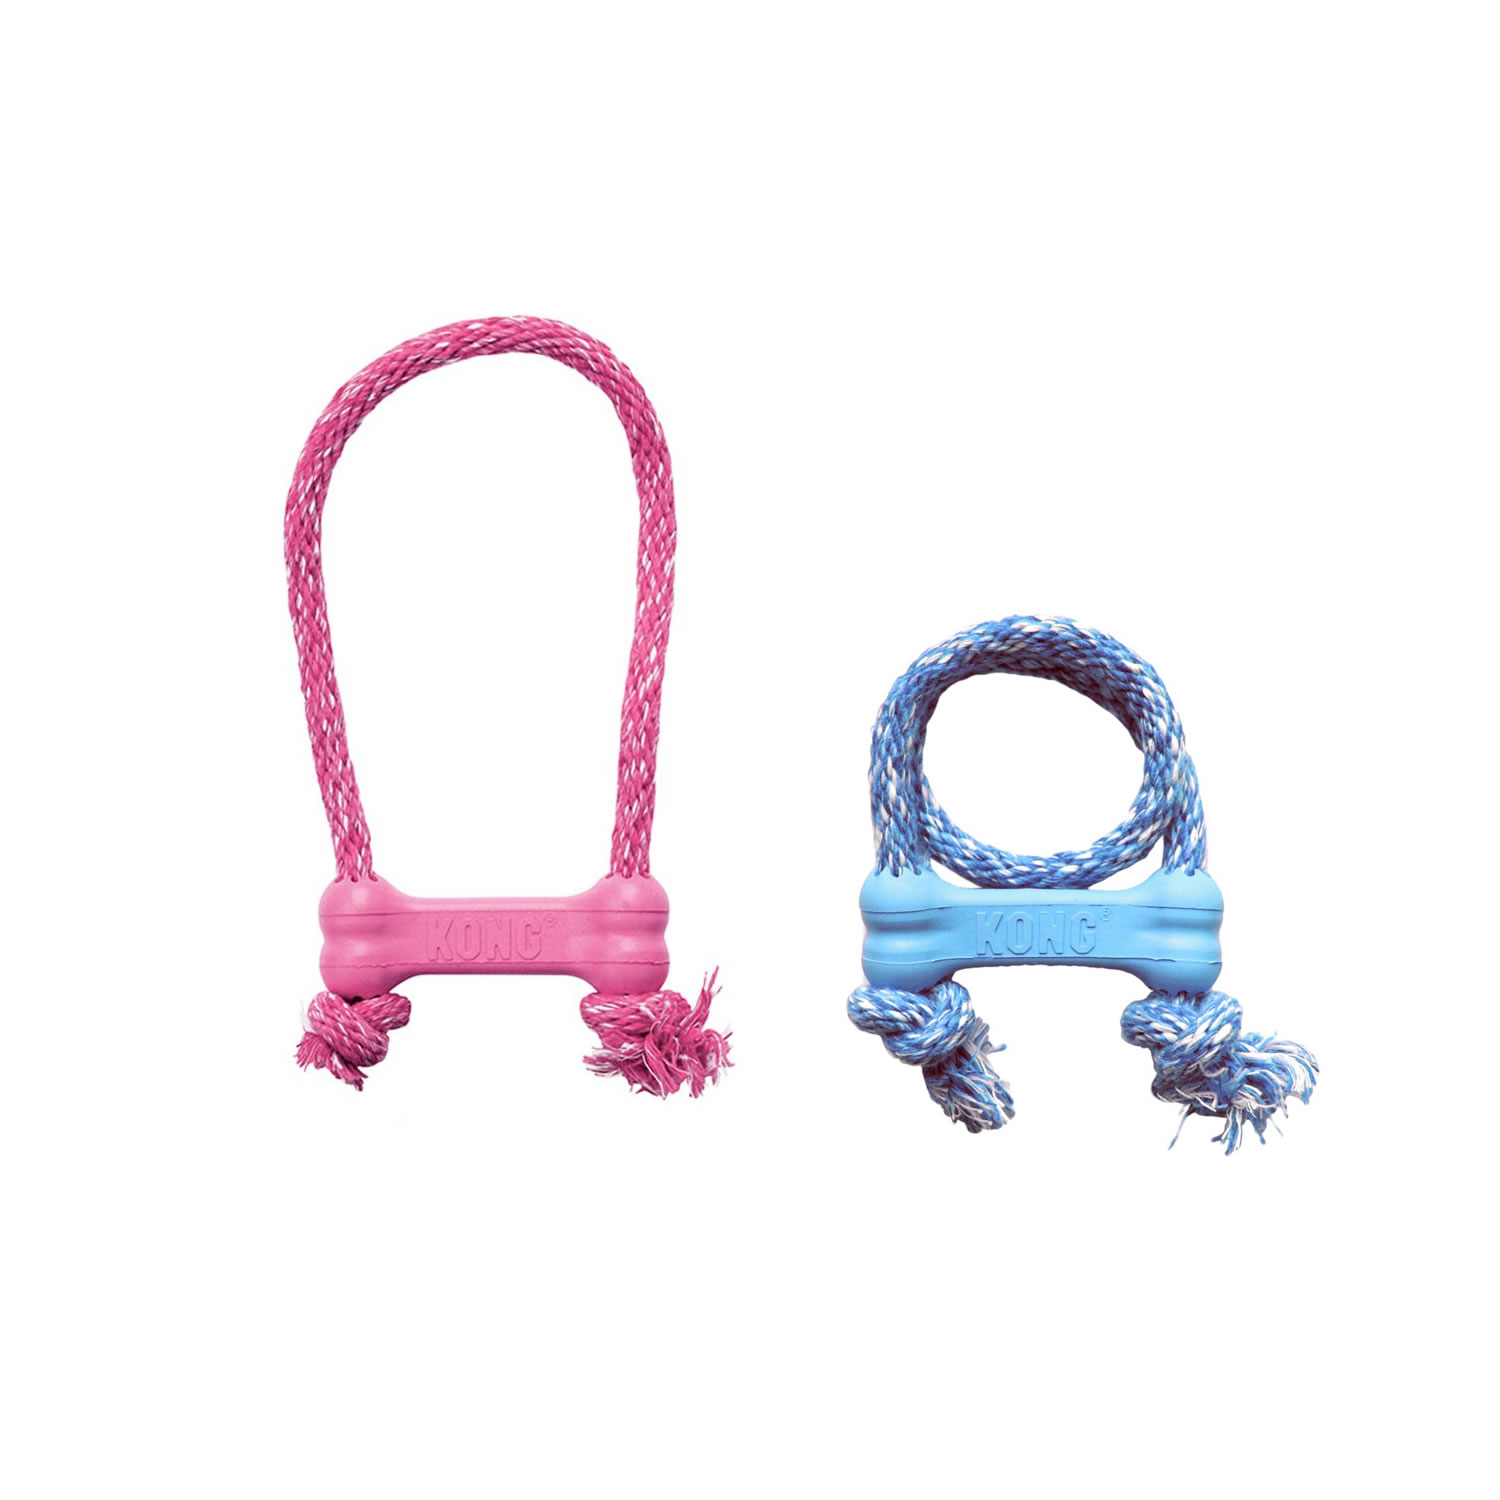 KONG PUPPY GOODIE BONE WITH ROPE XSMALL BLUE/PINK